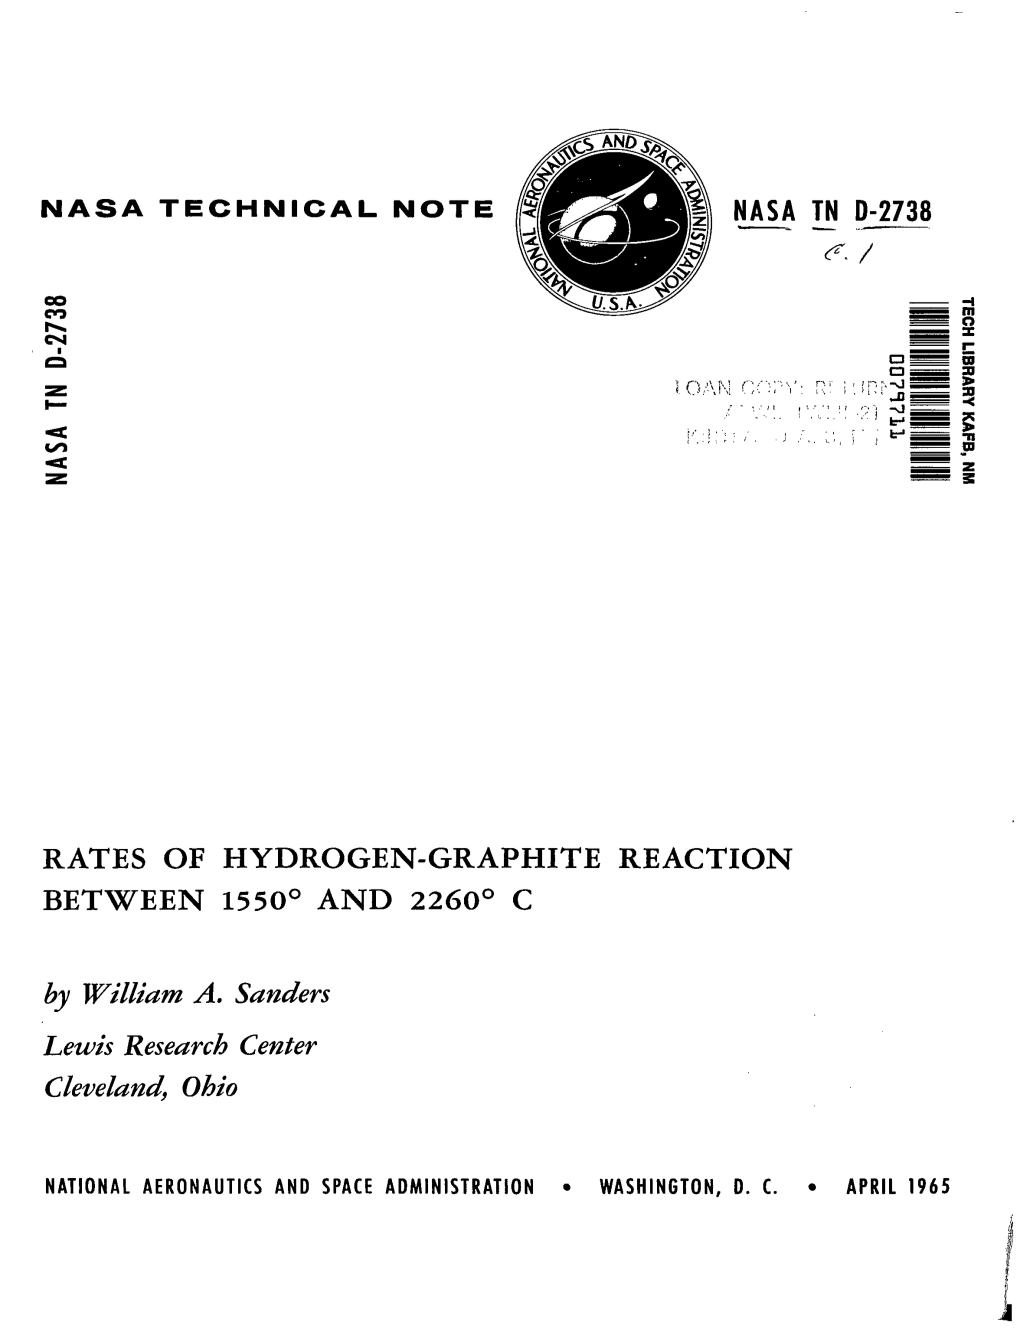 RATES of HYDROGEN-GRAPHITE REACTION BETWEEN 1550° and 2260° C by Wizzium A